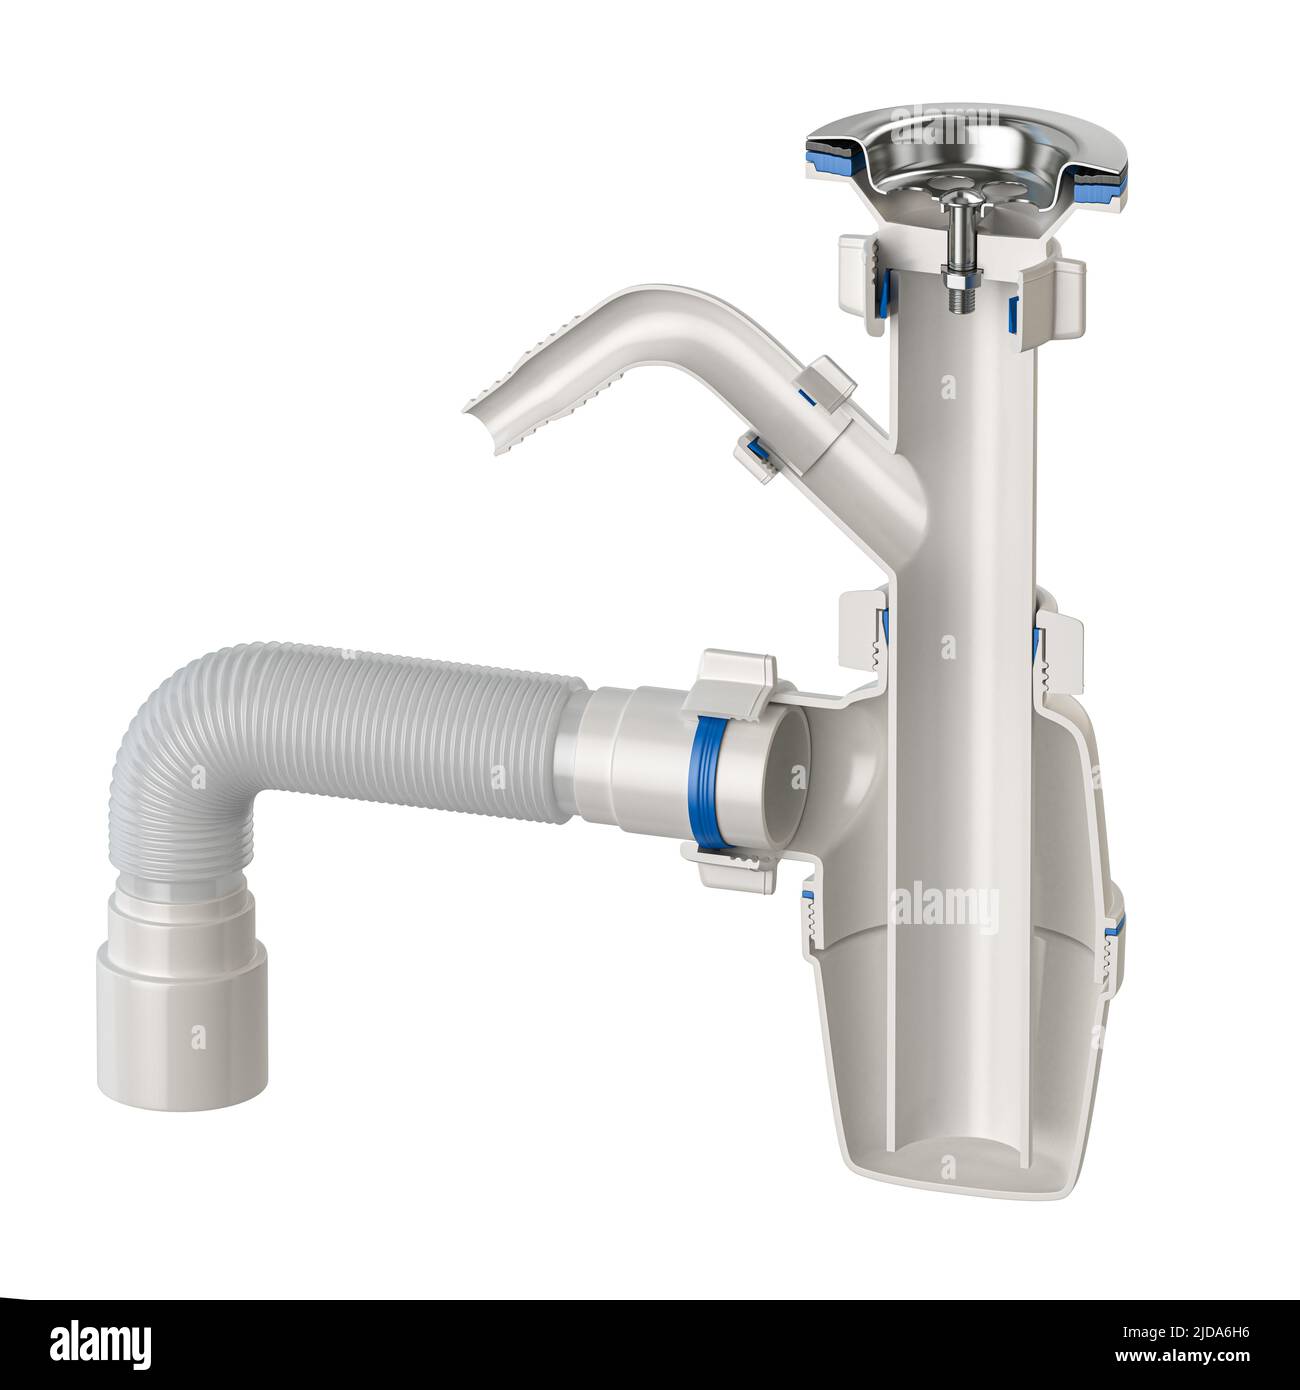 Cross section of siphon with bottle trap and pvc plastic pipes for sinks isolated on white. 3d illustration Stock Photo